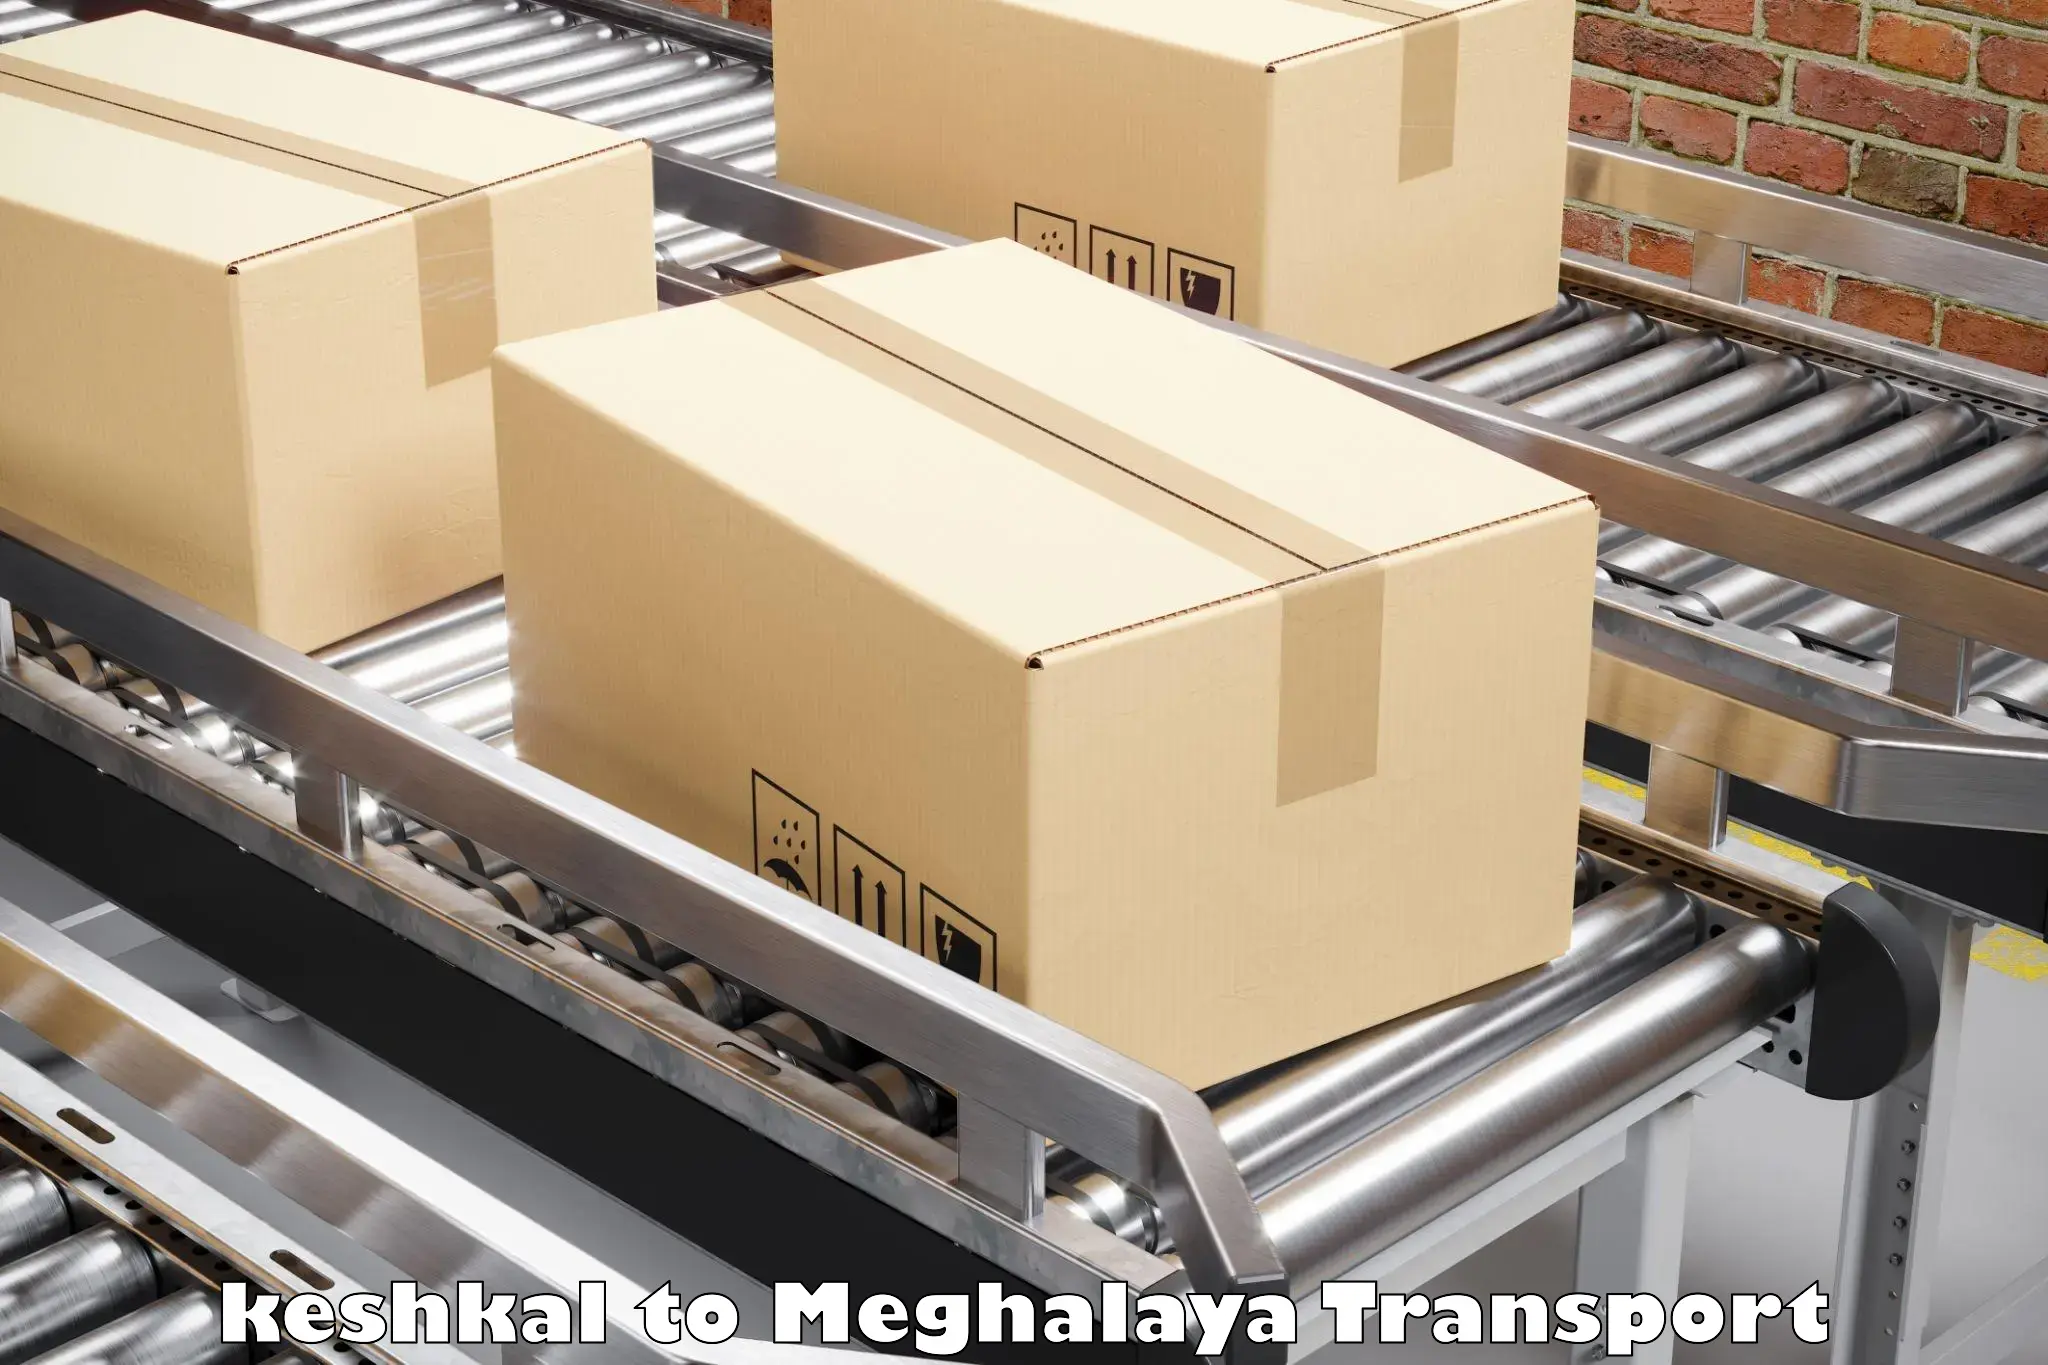 Truck transport companies in India keshkal to Shillong